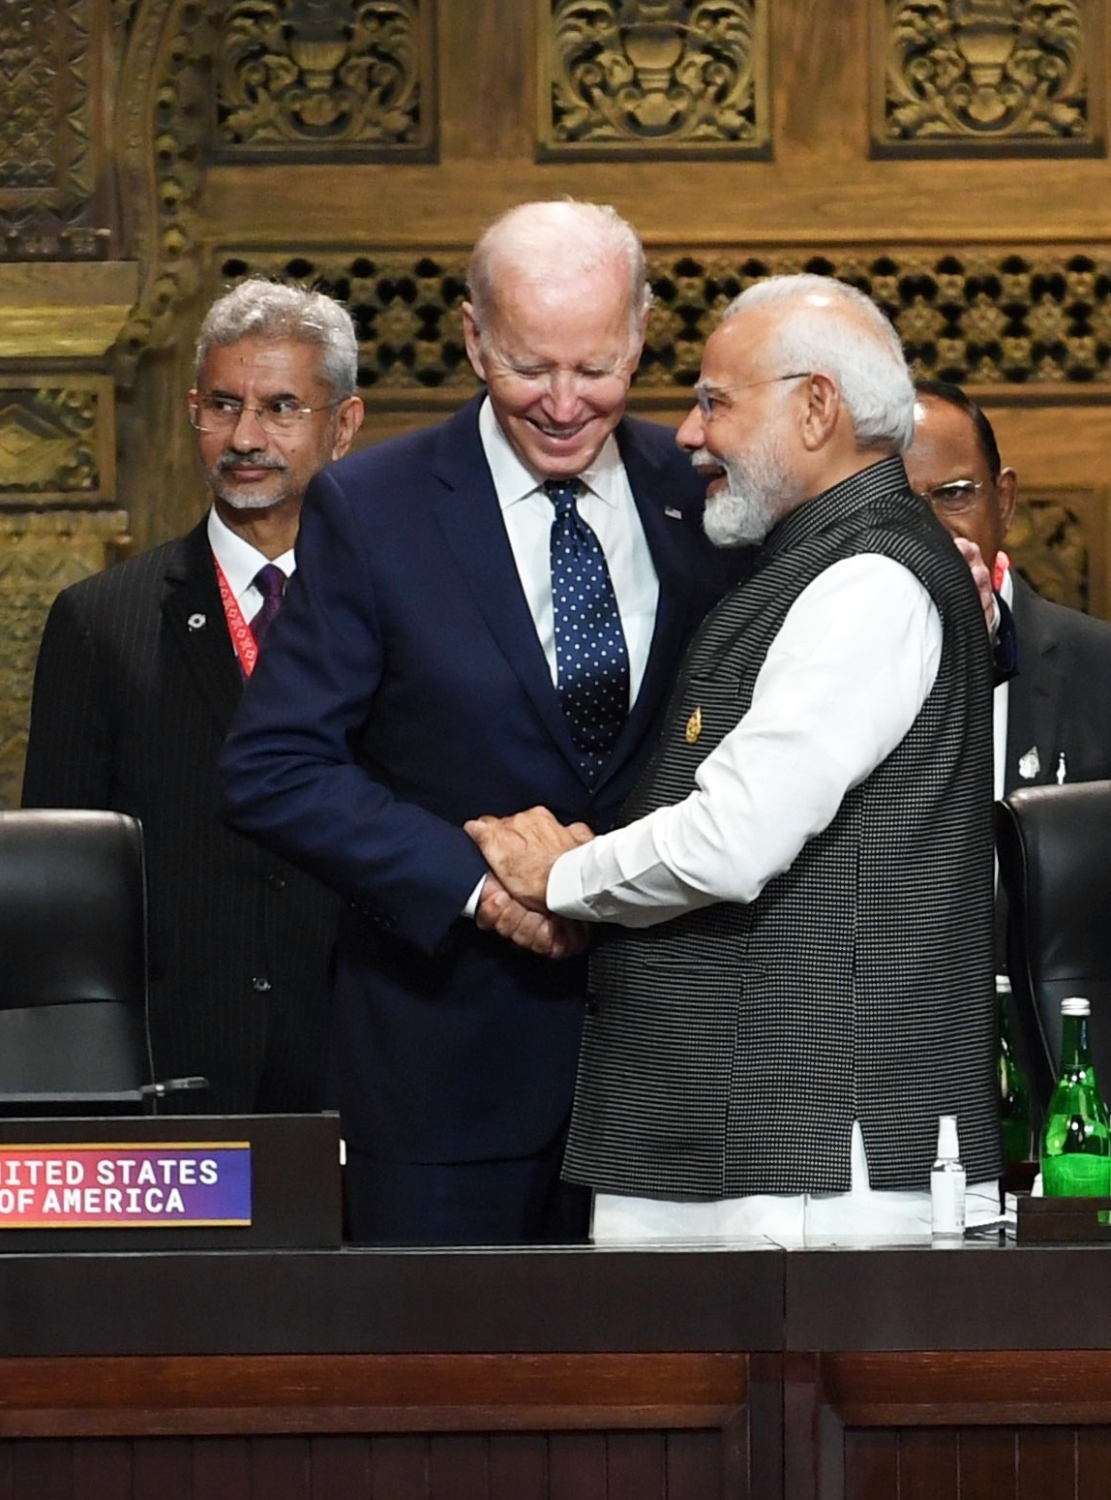 PM Modi thanks world leaders for supporting India's G20 Presidency